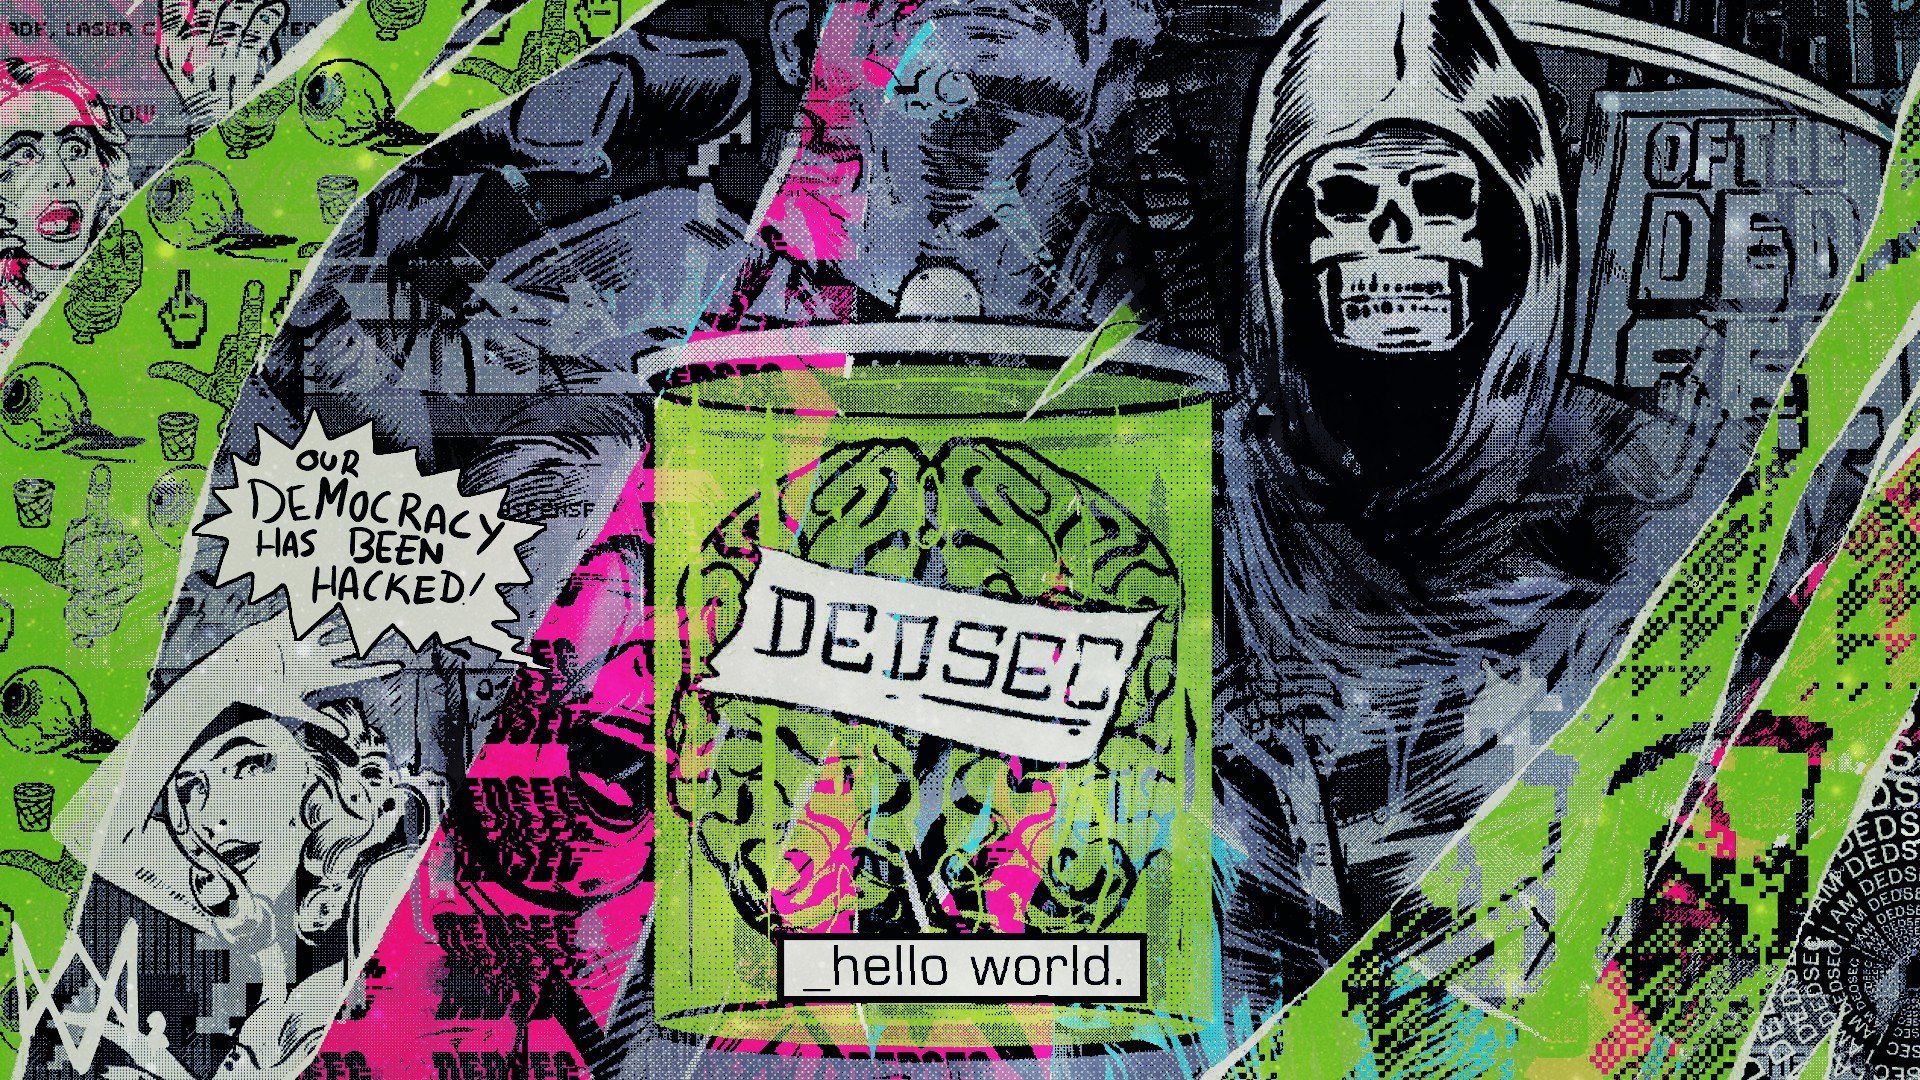 DEDSEC, Watch Dogs, Hacking, Democracy, Hello World, Watch Dogs 2 HD Wallpaper / Desktop and Mobile Image & Photo